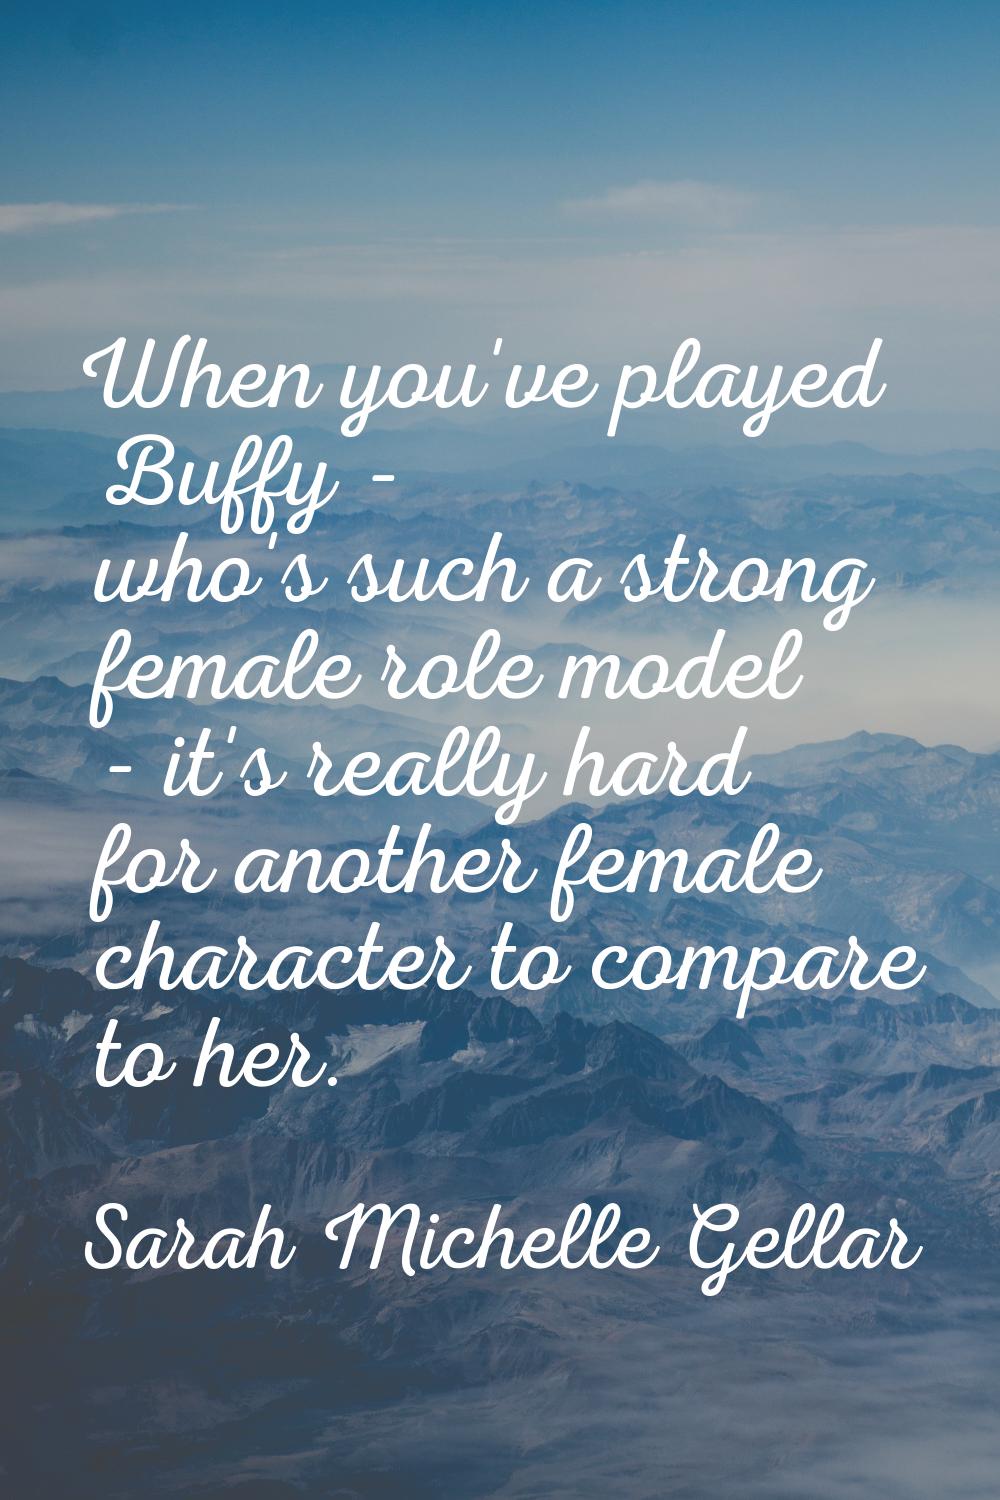 When you've played Buffy - who's such a strong female role model - it's really hard for another fem